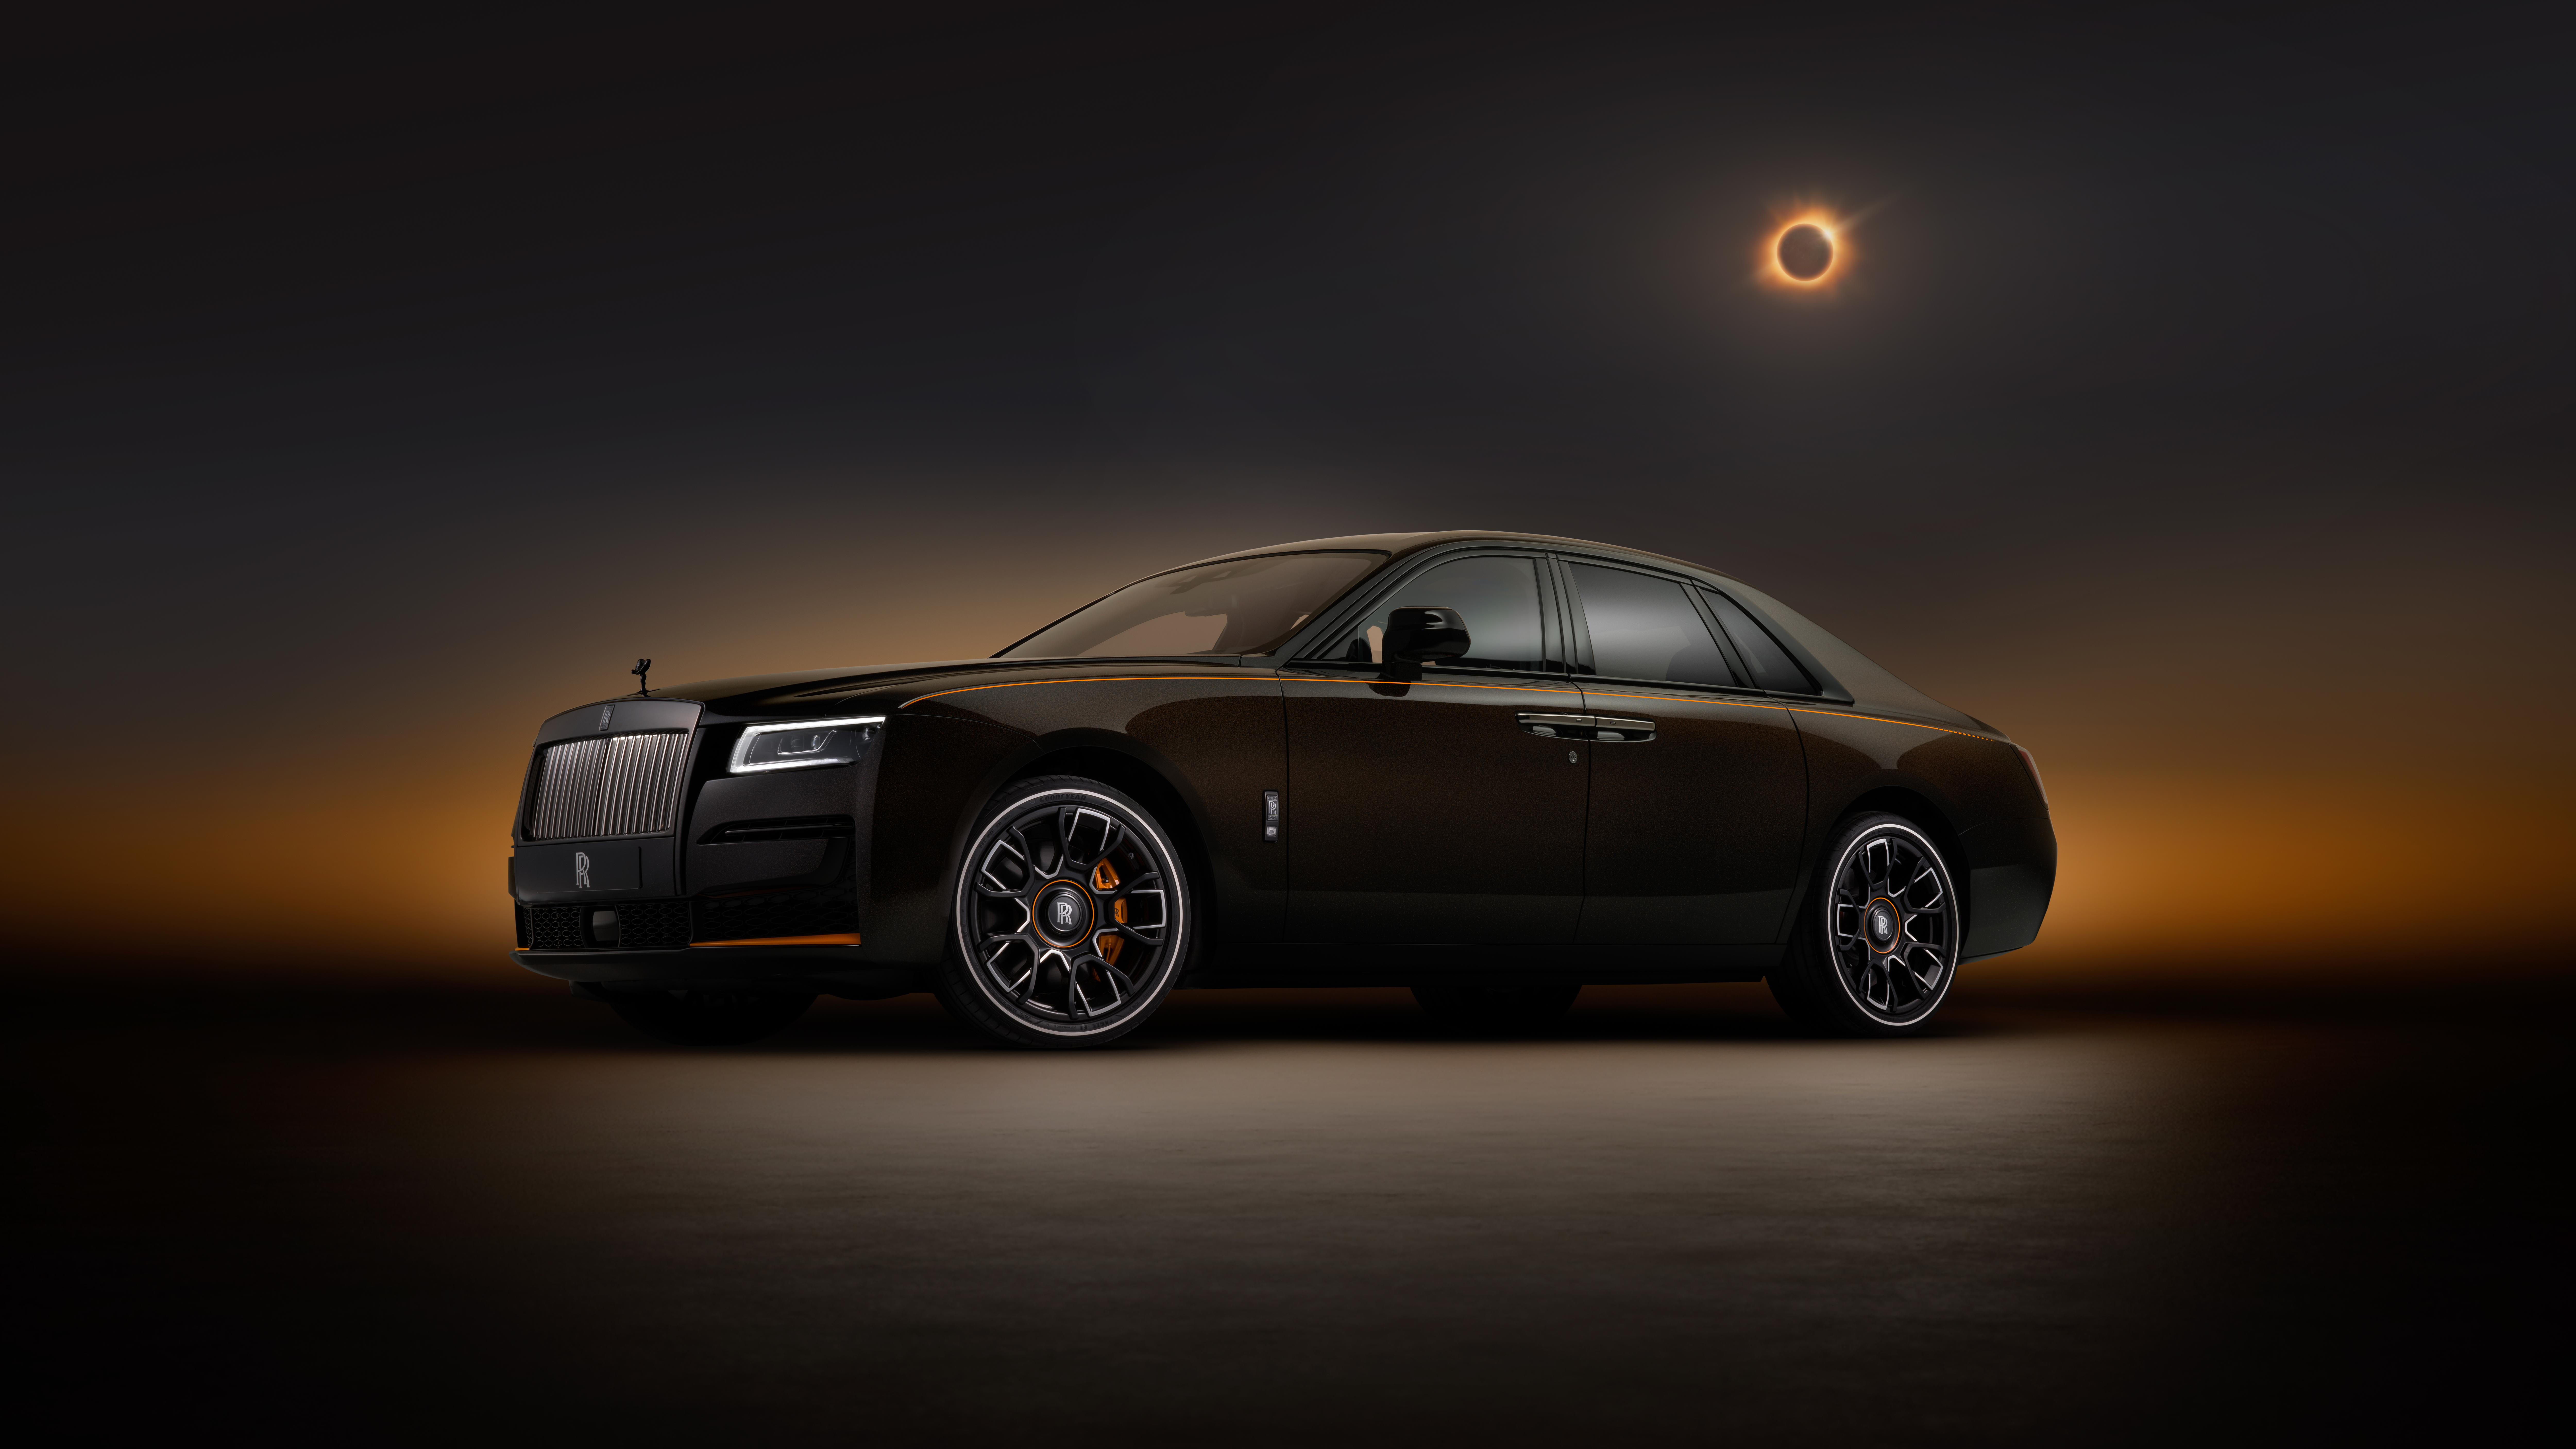 New Rolls-Royce available in Texas at Rolls-Royce Motor Cars Houston